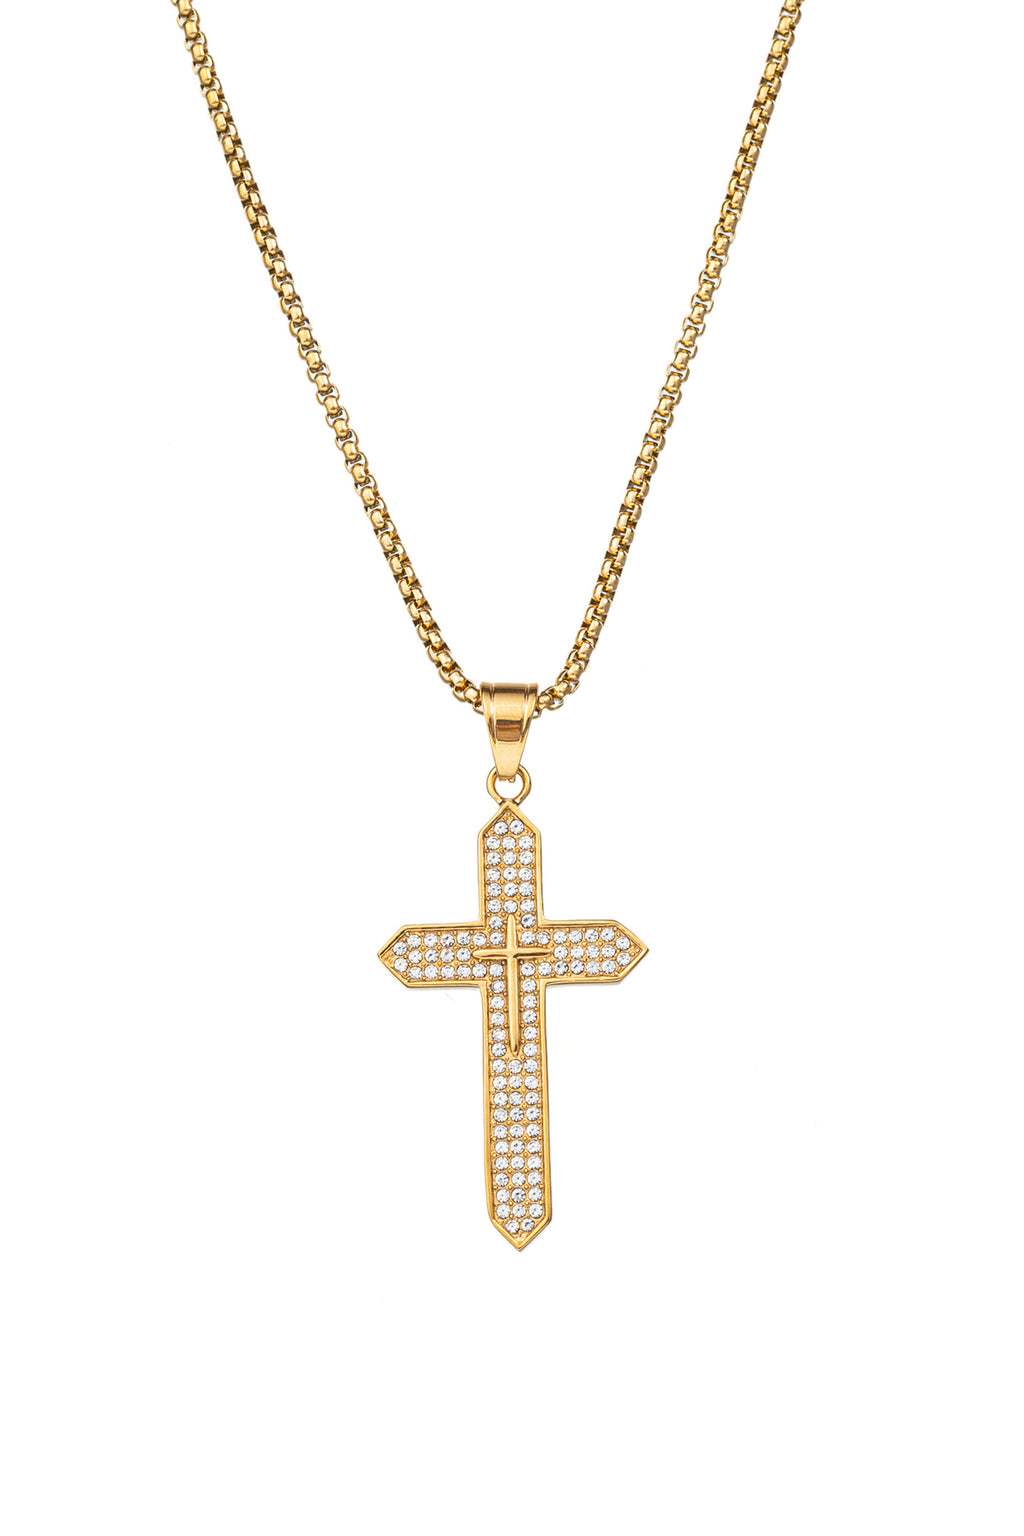 Gold tone titanium spike cross pendant necklace studded with CZ crystals.